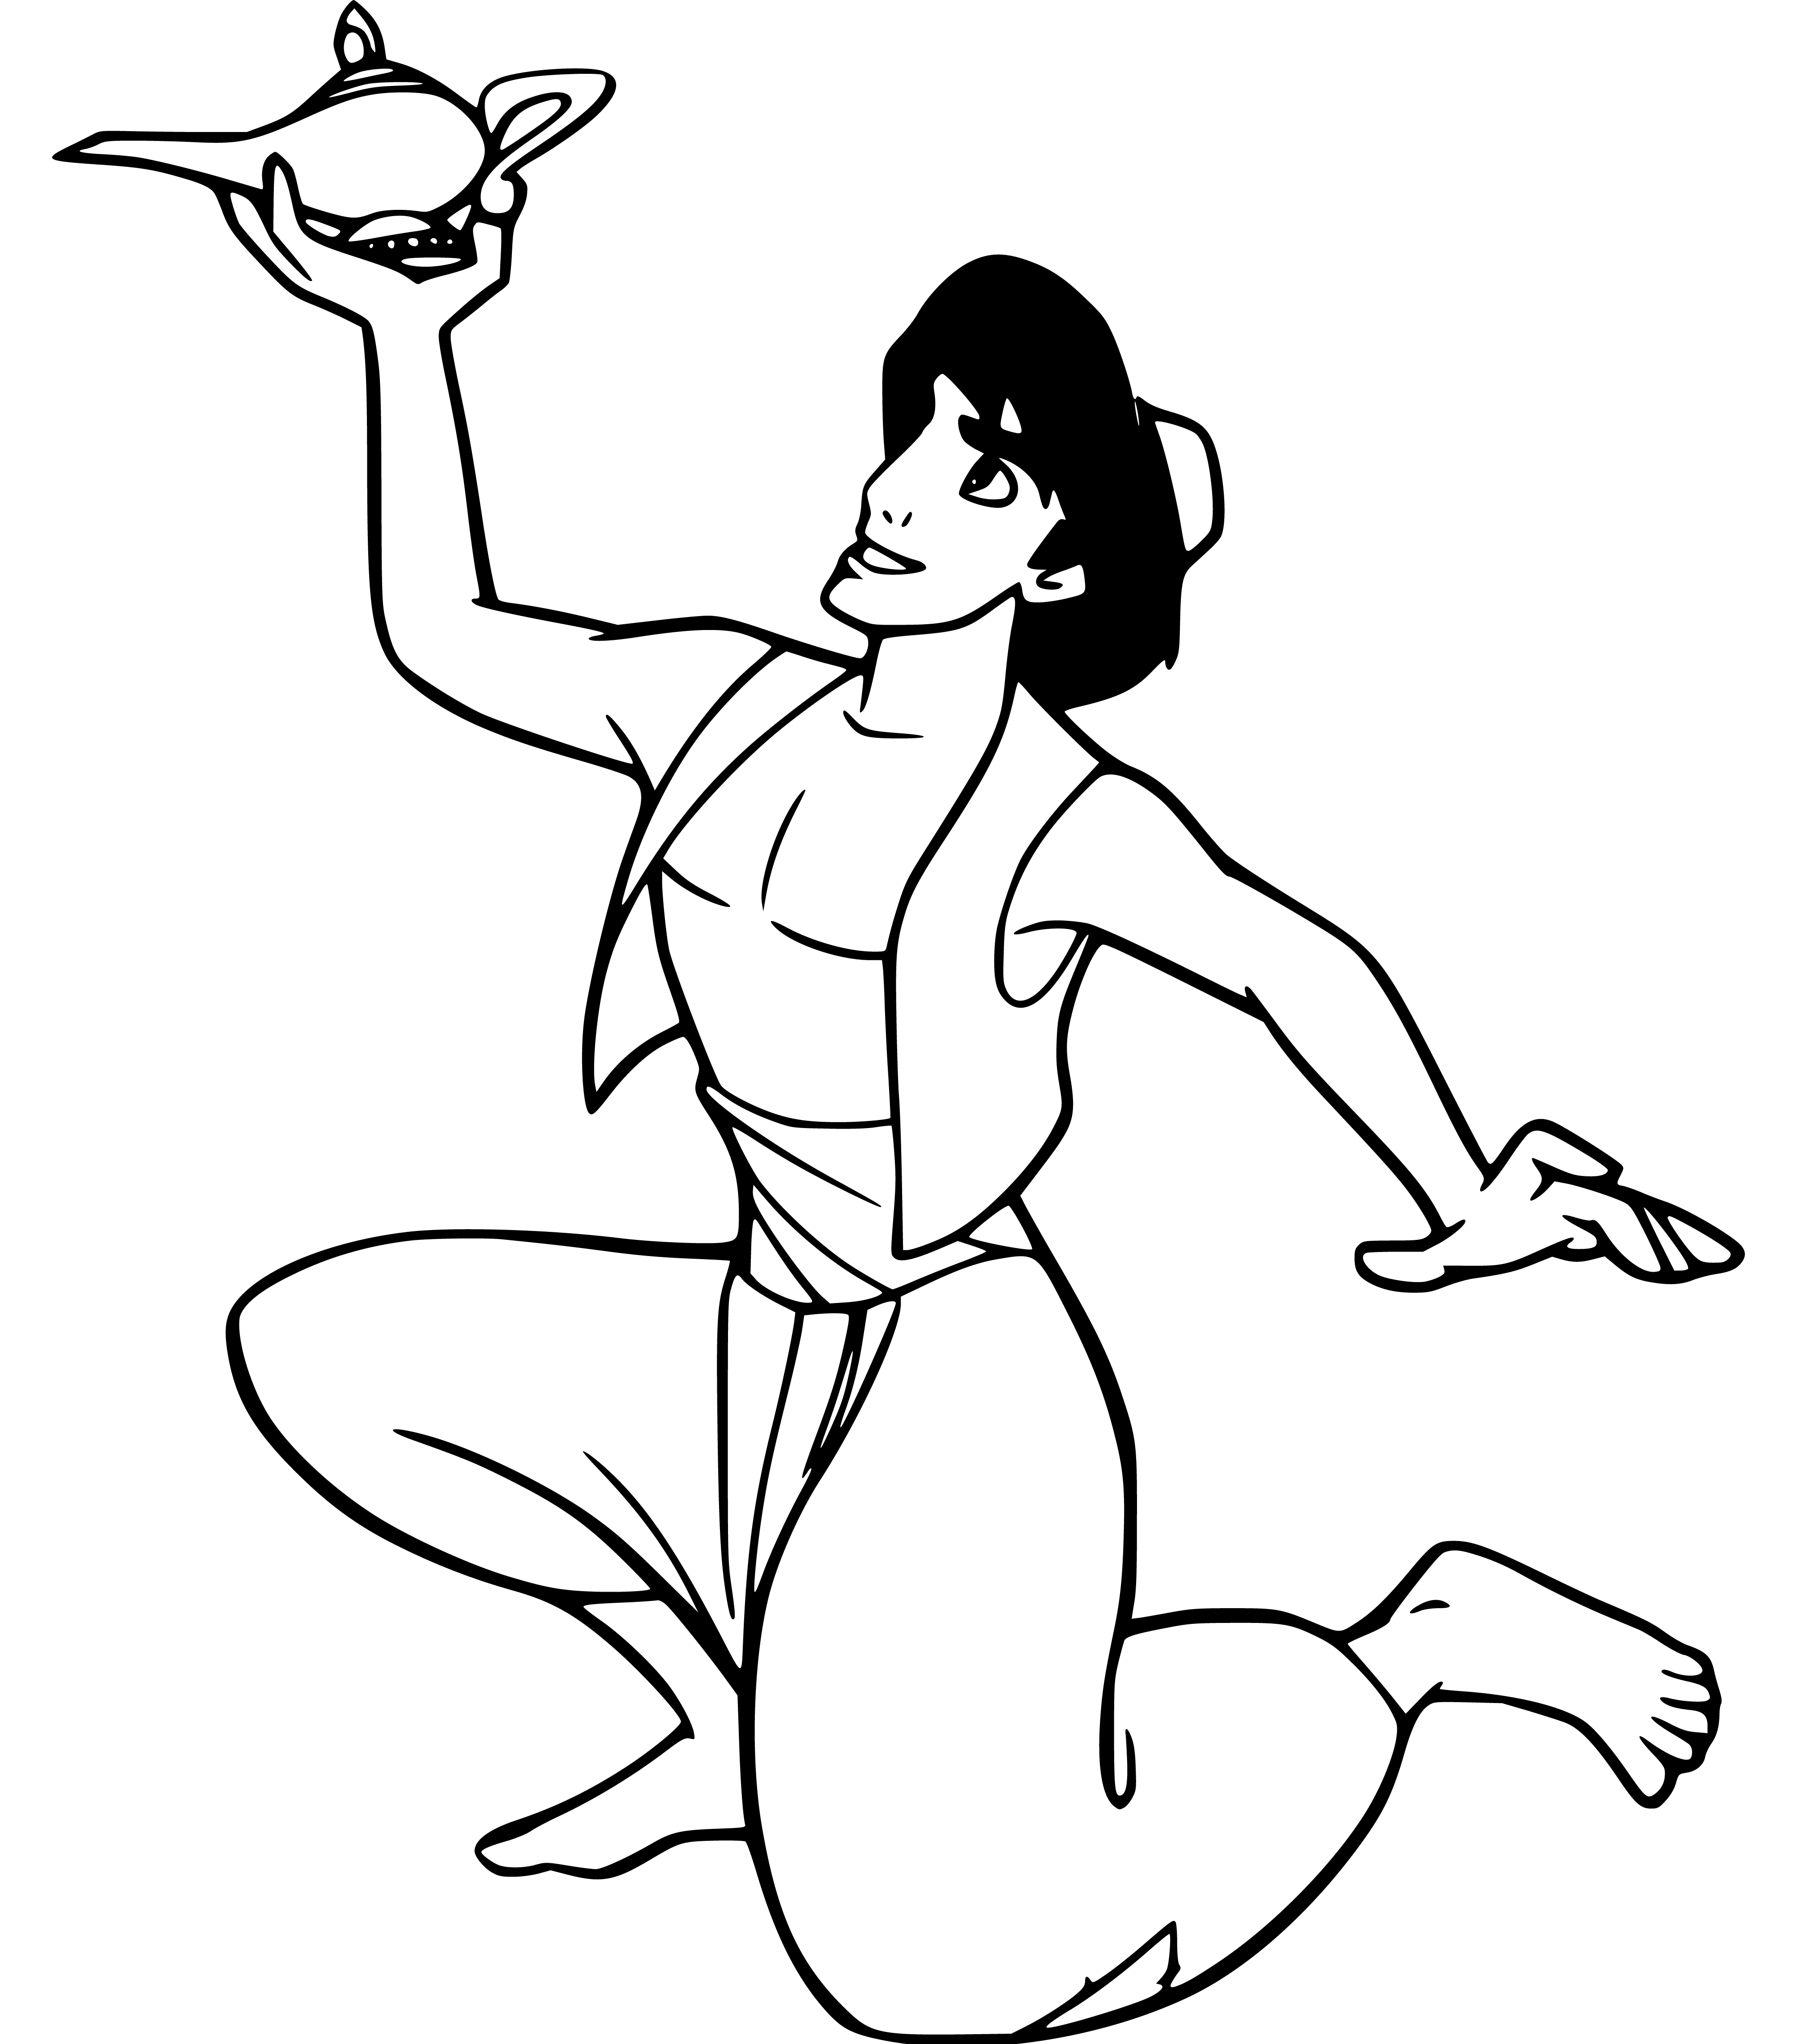 Aladdin holding magic lamb drawing Coloring Page Printable for Kids, Free, Simple and Easy, as PDF